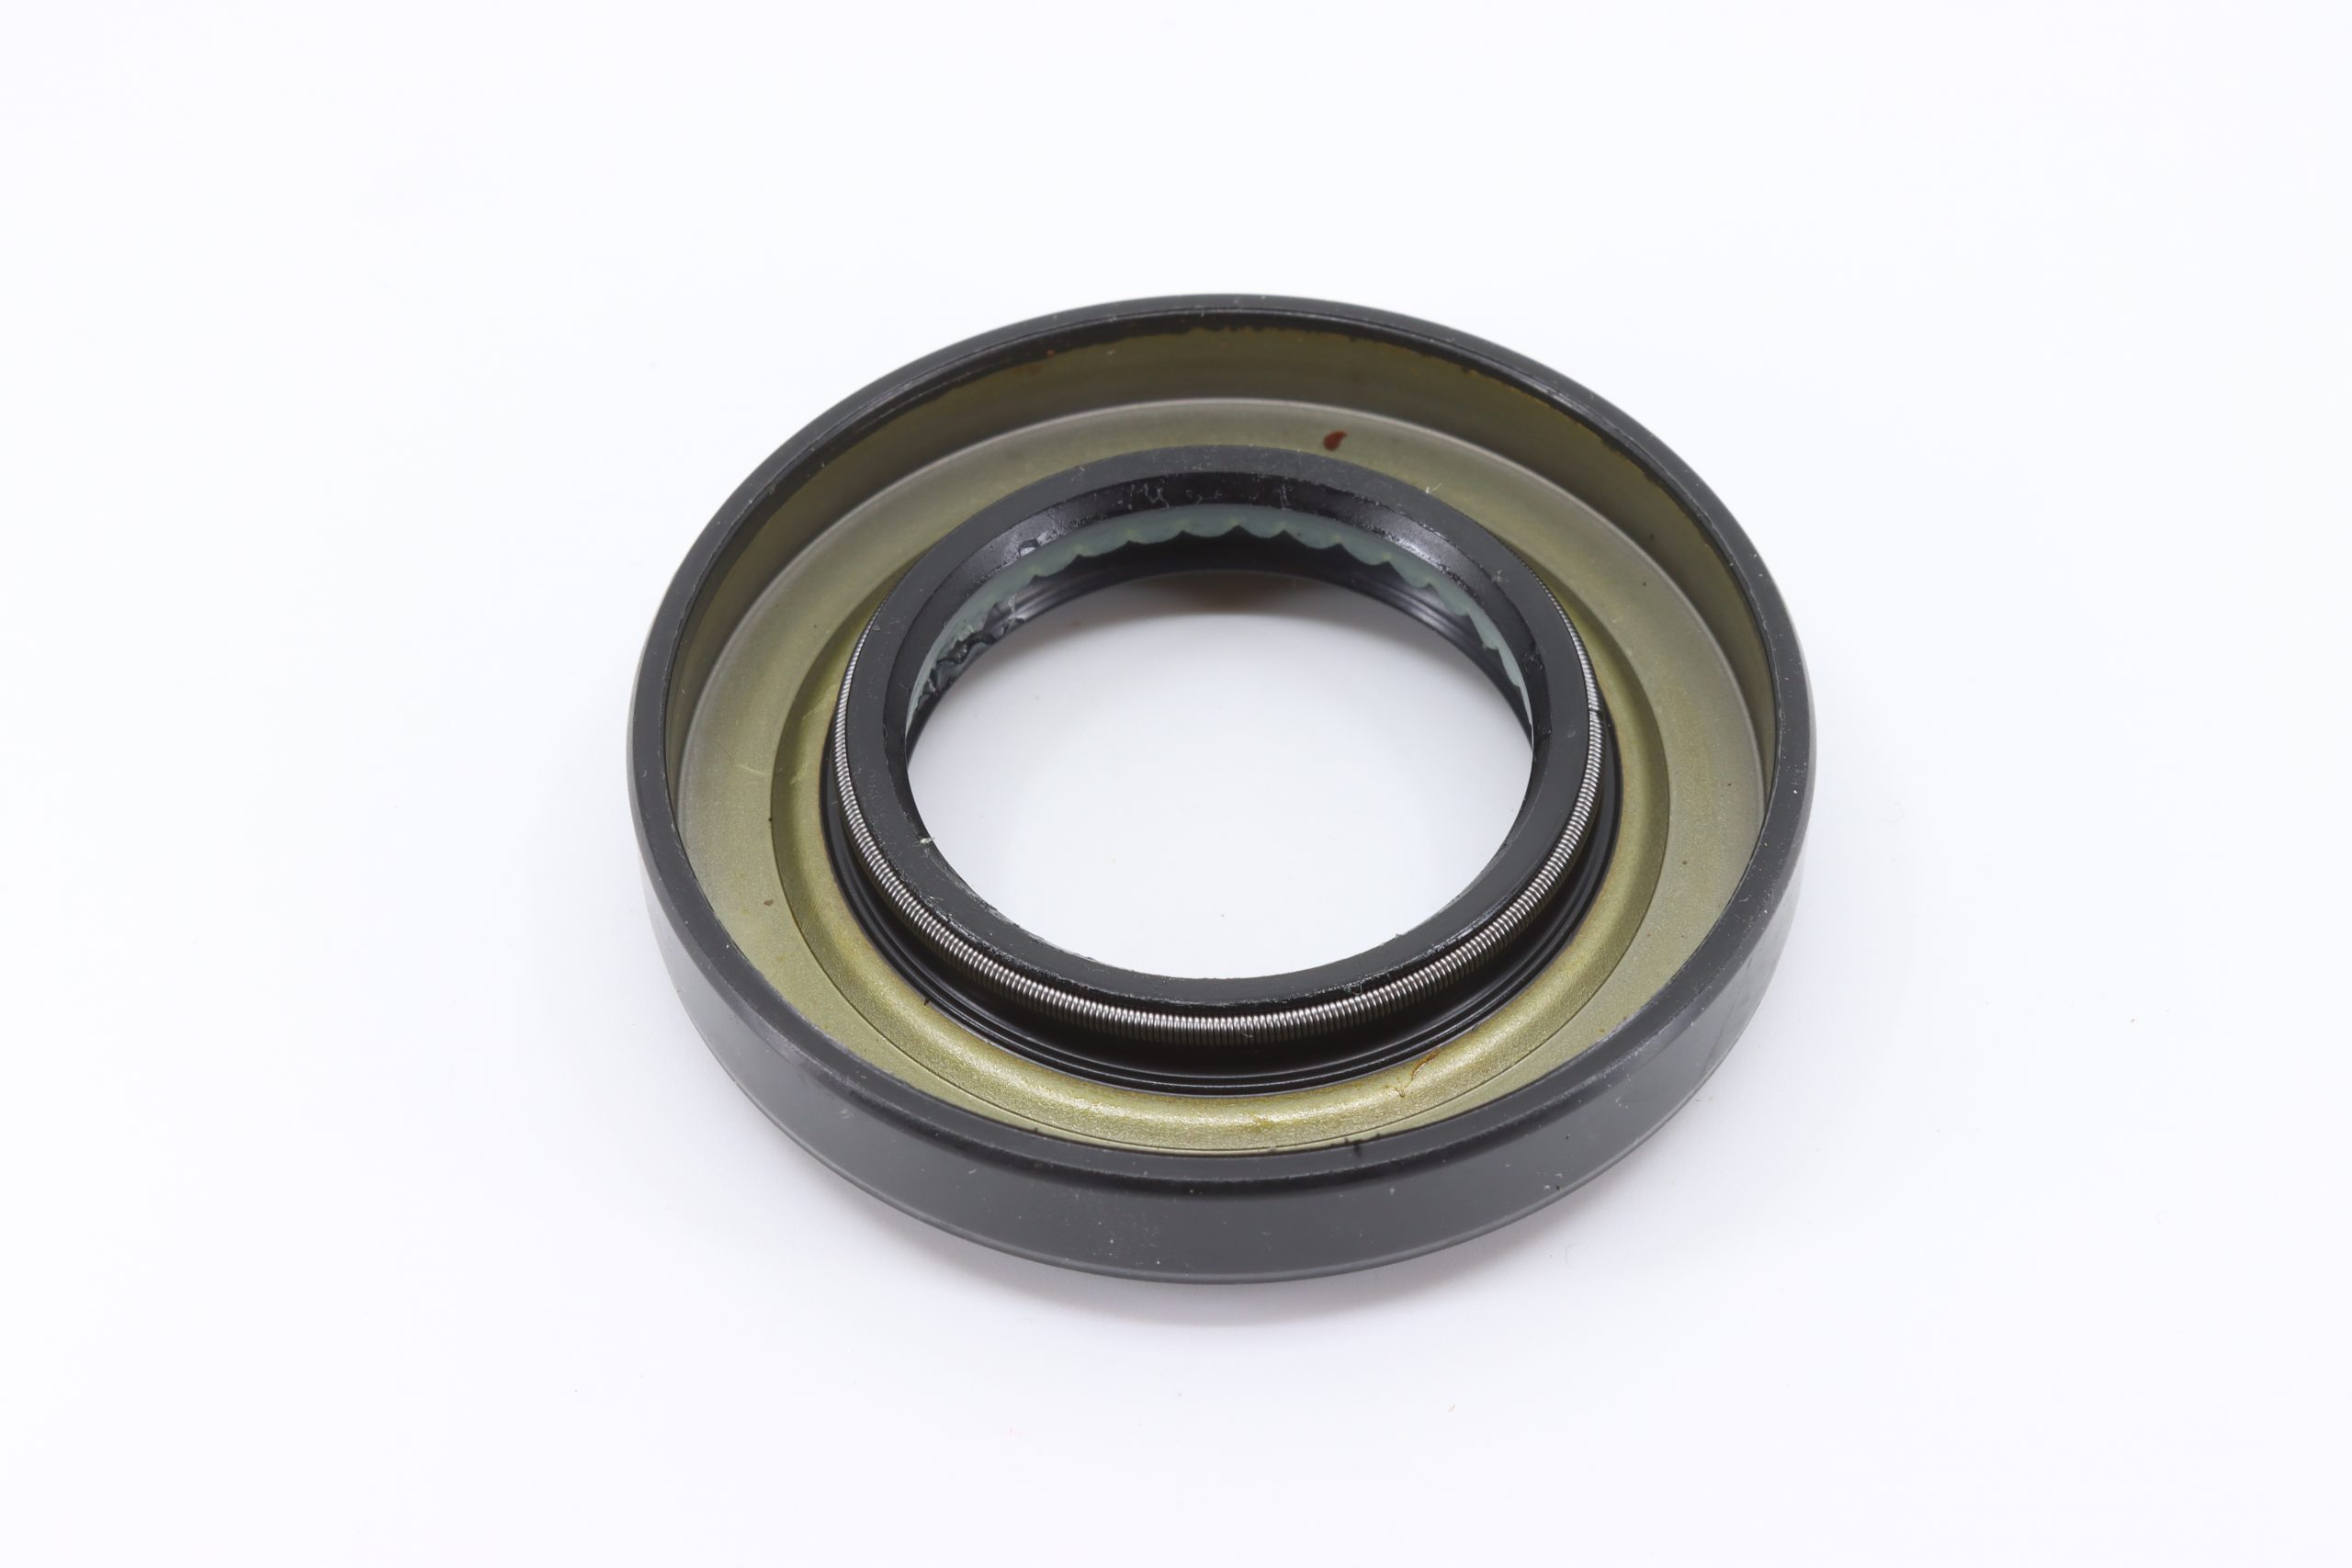 Details about  / Hofland  480113N Oil Seal TC 200 x170 x15 NBR New